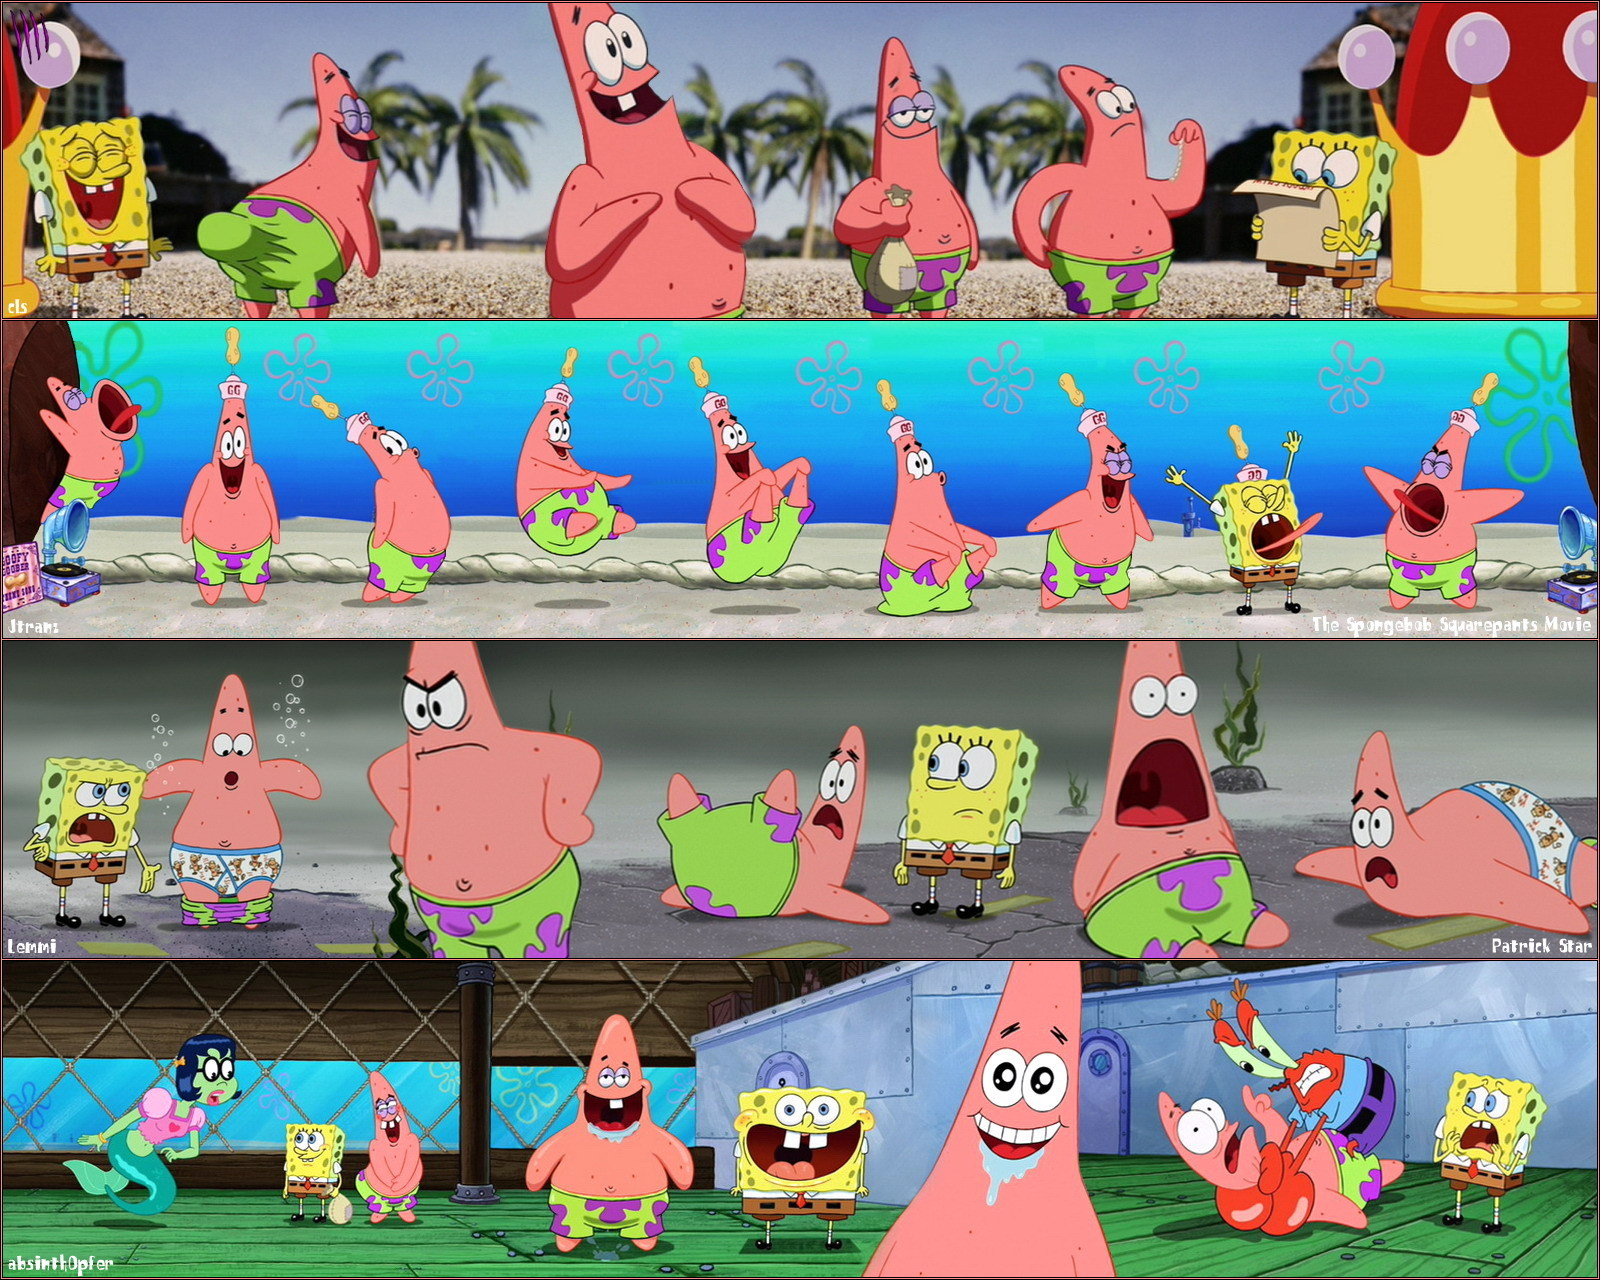 Spongebob And Patrick Star Is The Best Friend Playing - Patrick Star Spongebob Squarepants Movie , HD Wallpaper & Backgrounds